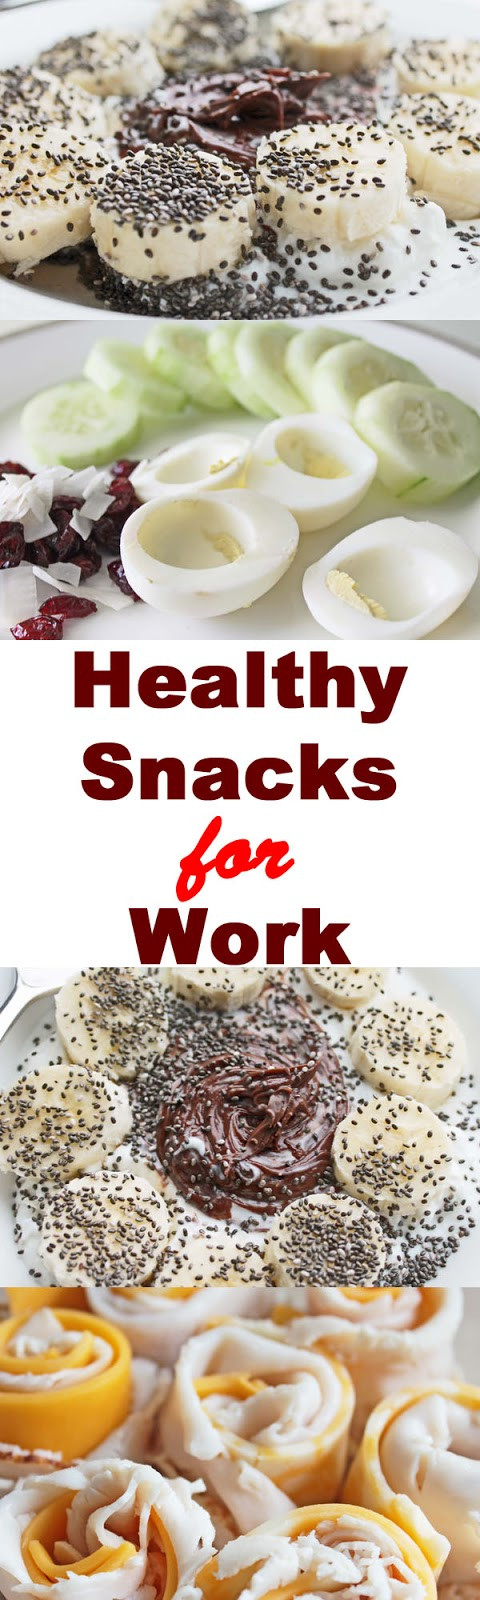 Healthy Snacks For Working Out
 Healthy Snacks for Work Daily Re mendations 13